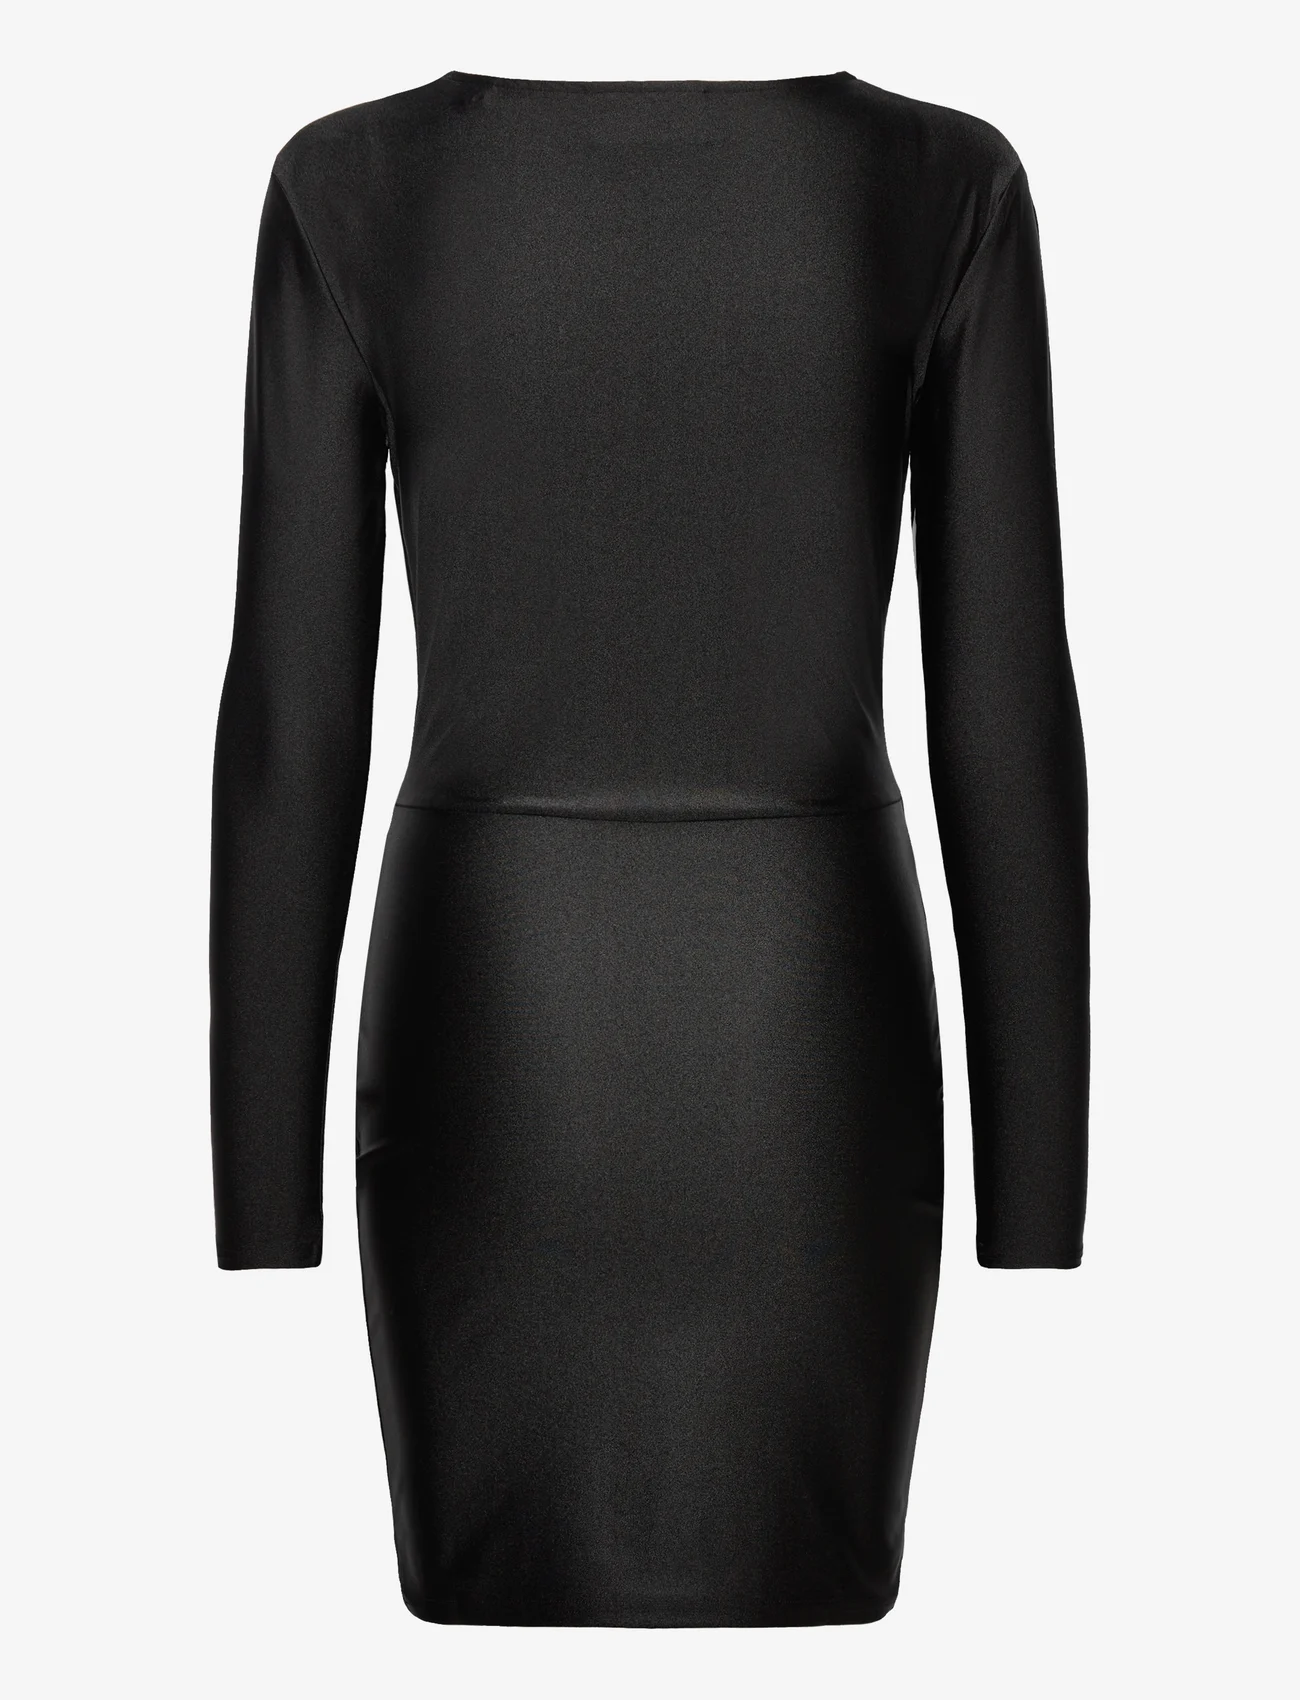 HAN Kjøbenhavn - Stretch Jersey Ruche Cut Out Dress - party wear at outlet prices - black - 1